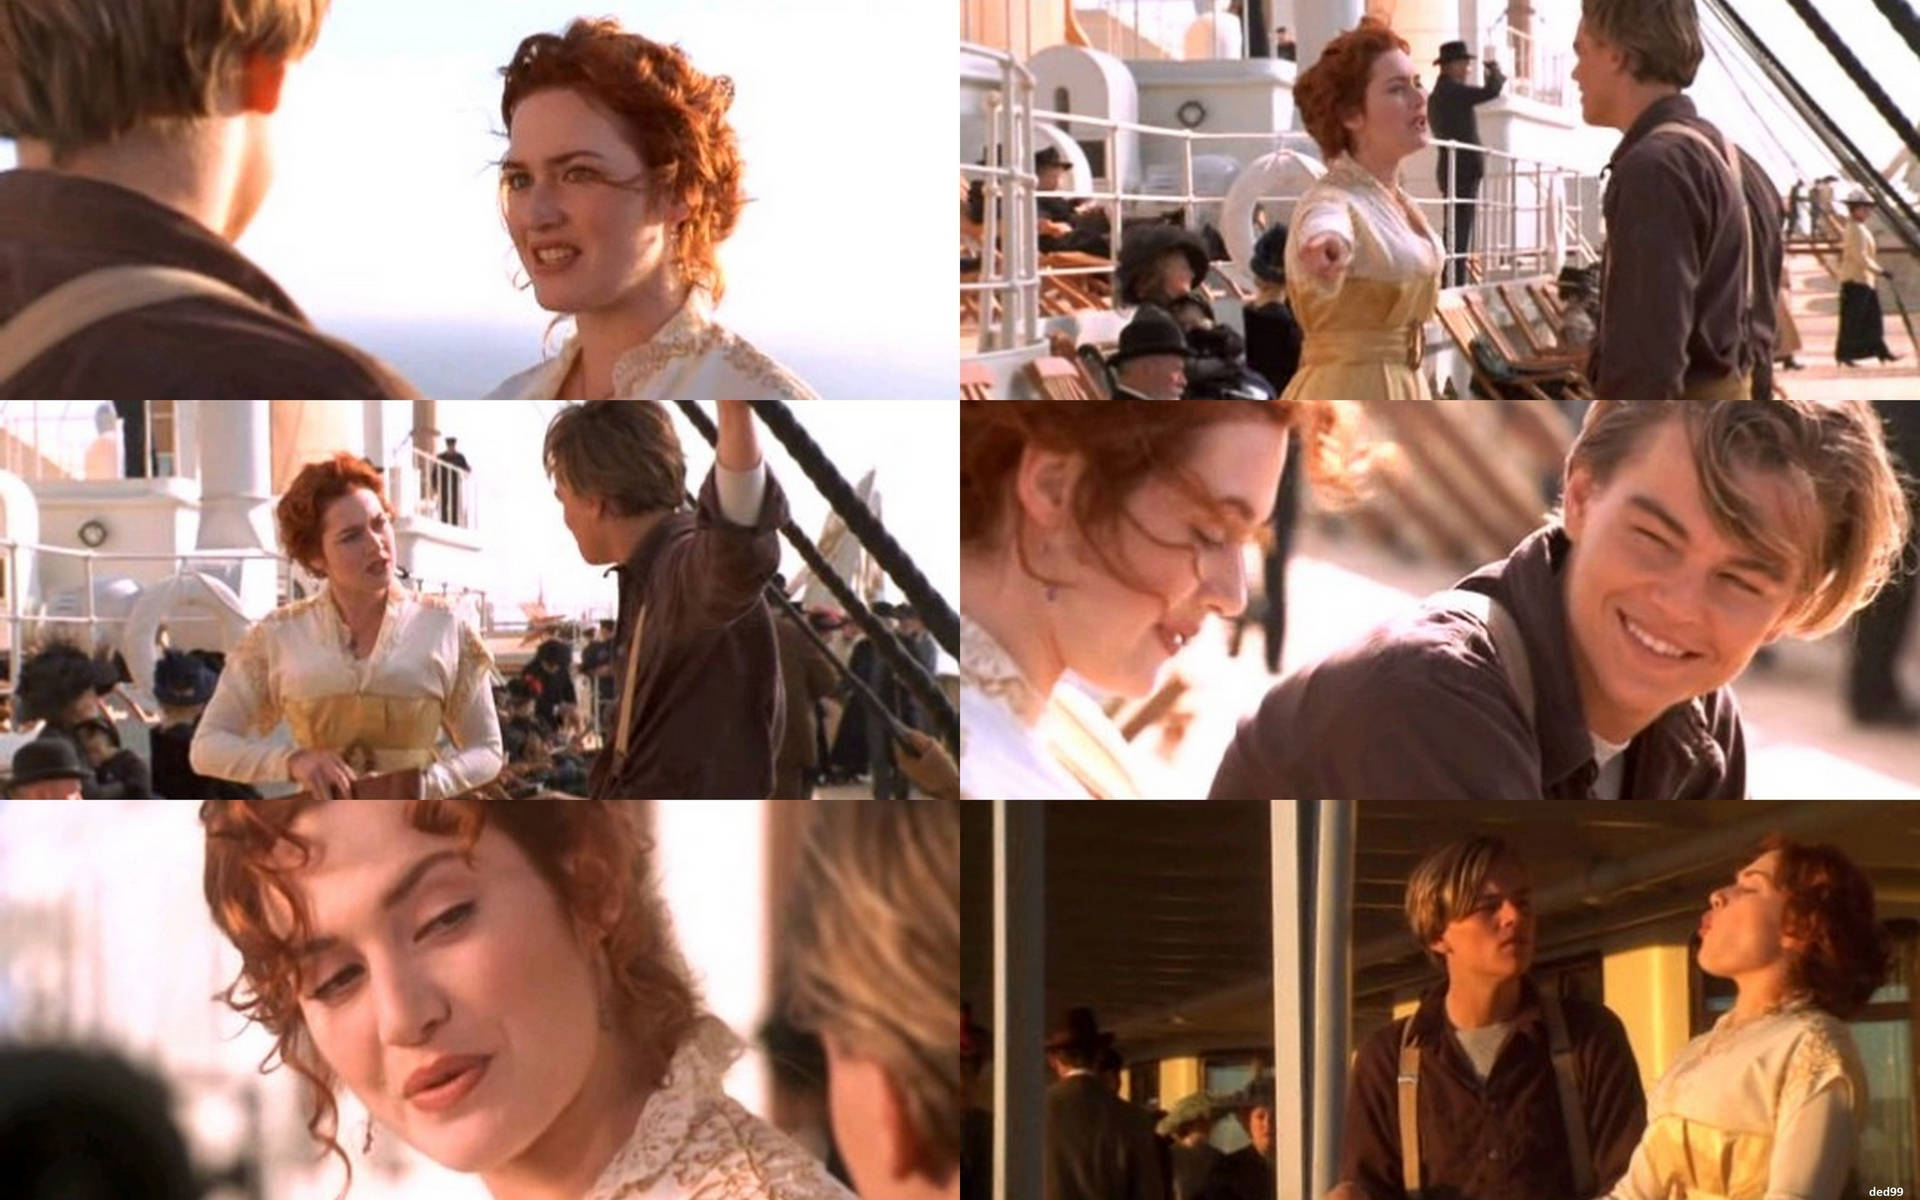 Titanic got me in my feels | The Ambivert's Pessimistic Daybook